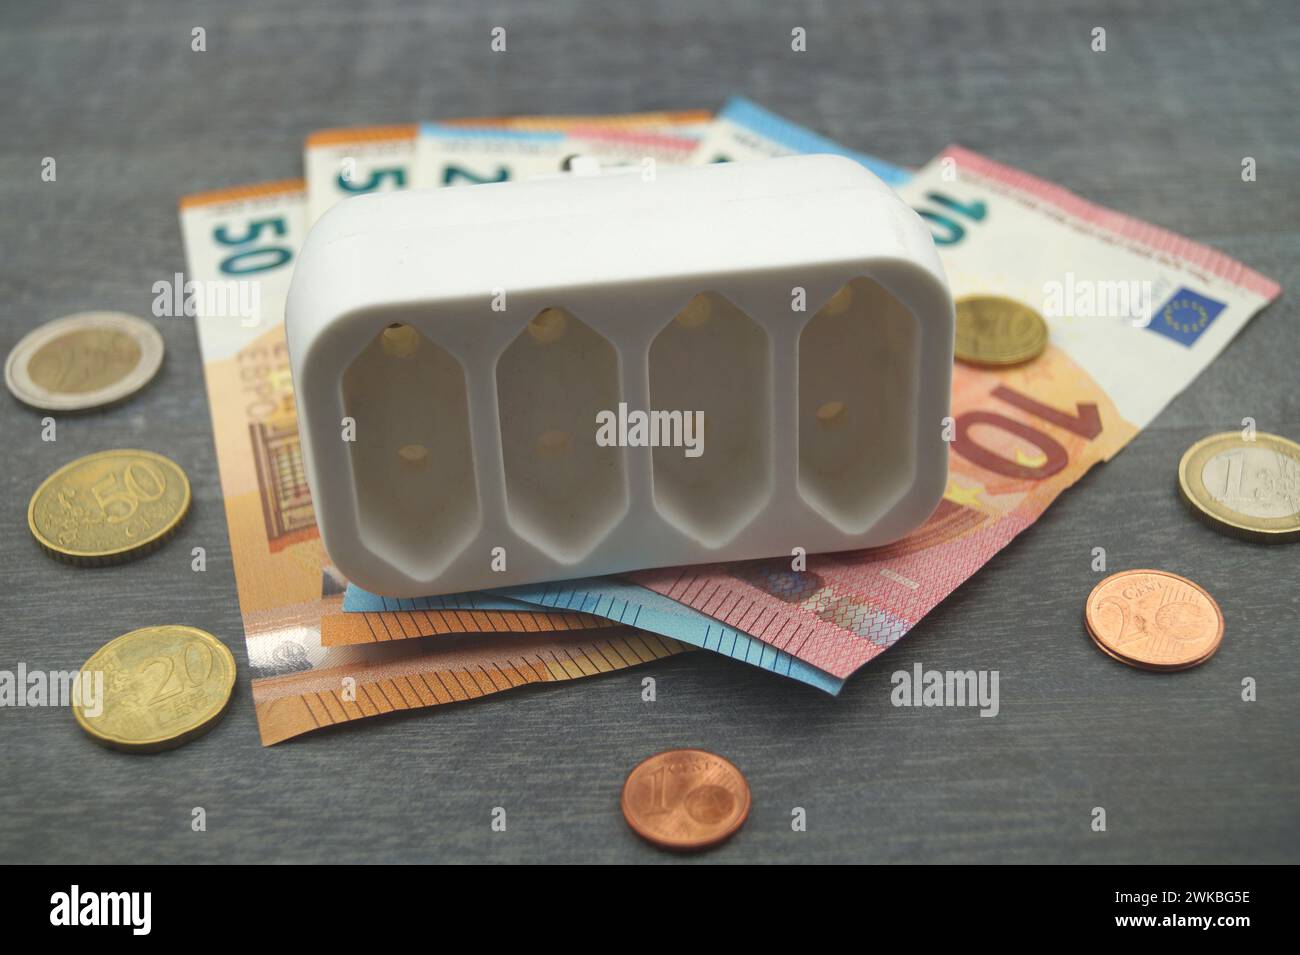 Socket and money, symbolic image of electricity costs Stock Photo